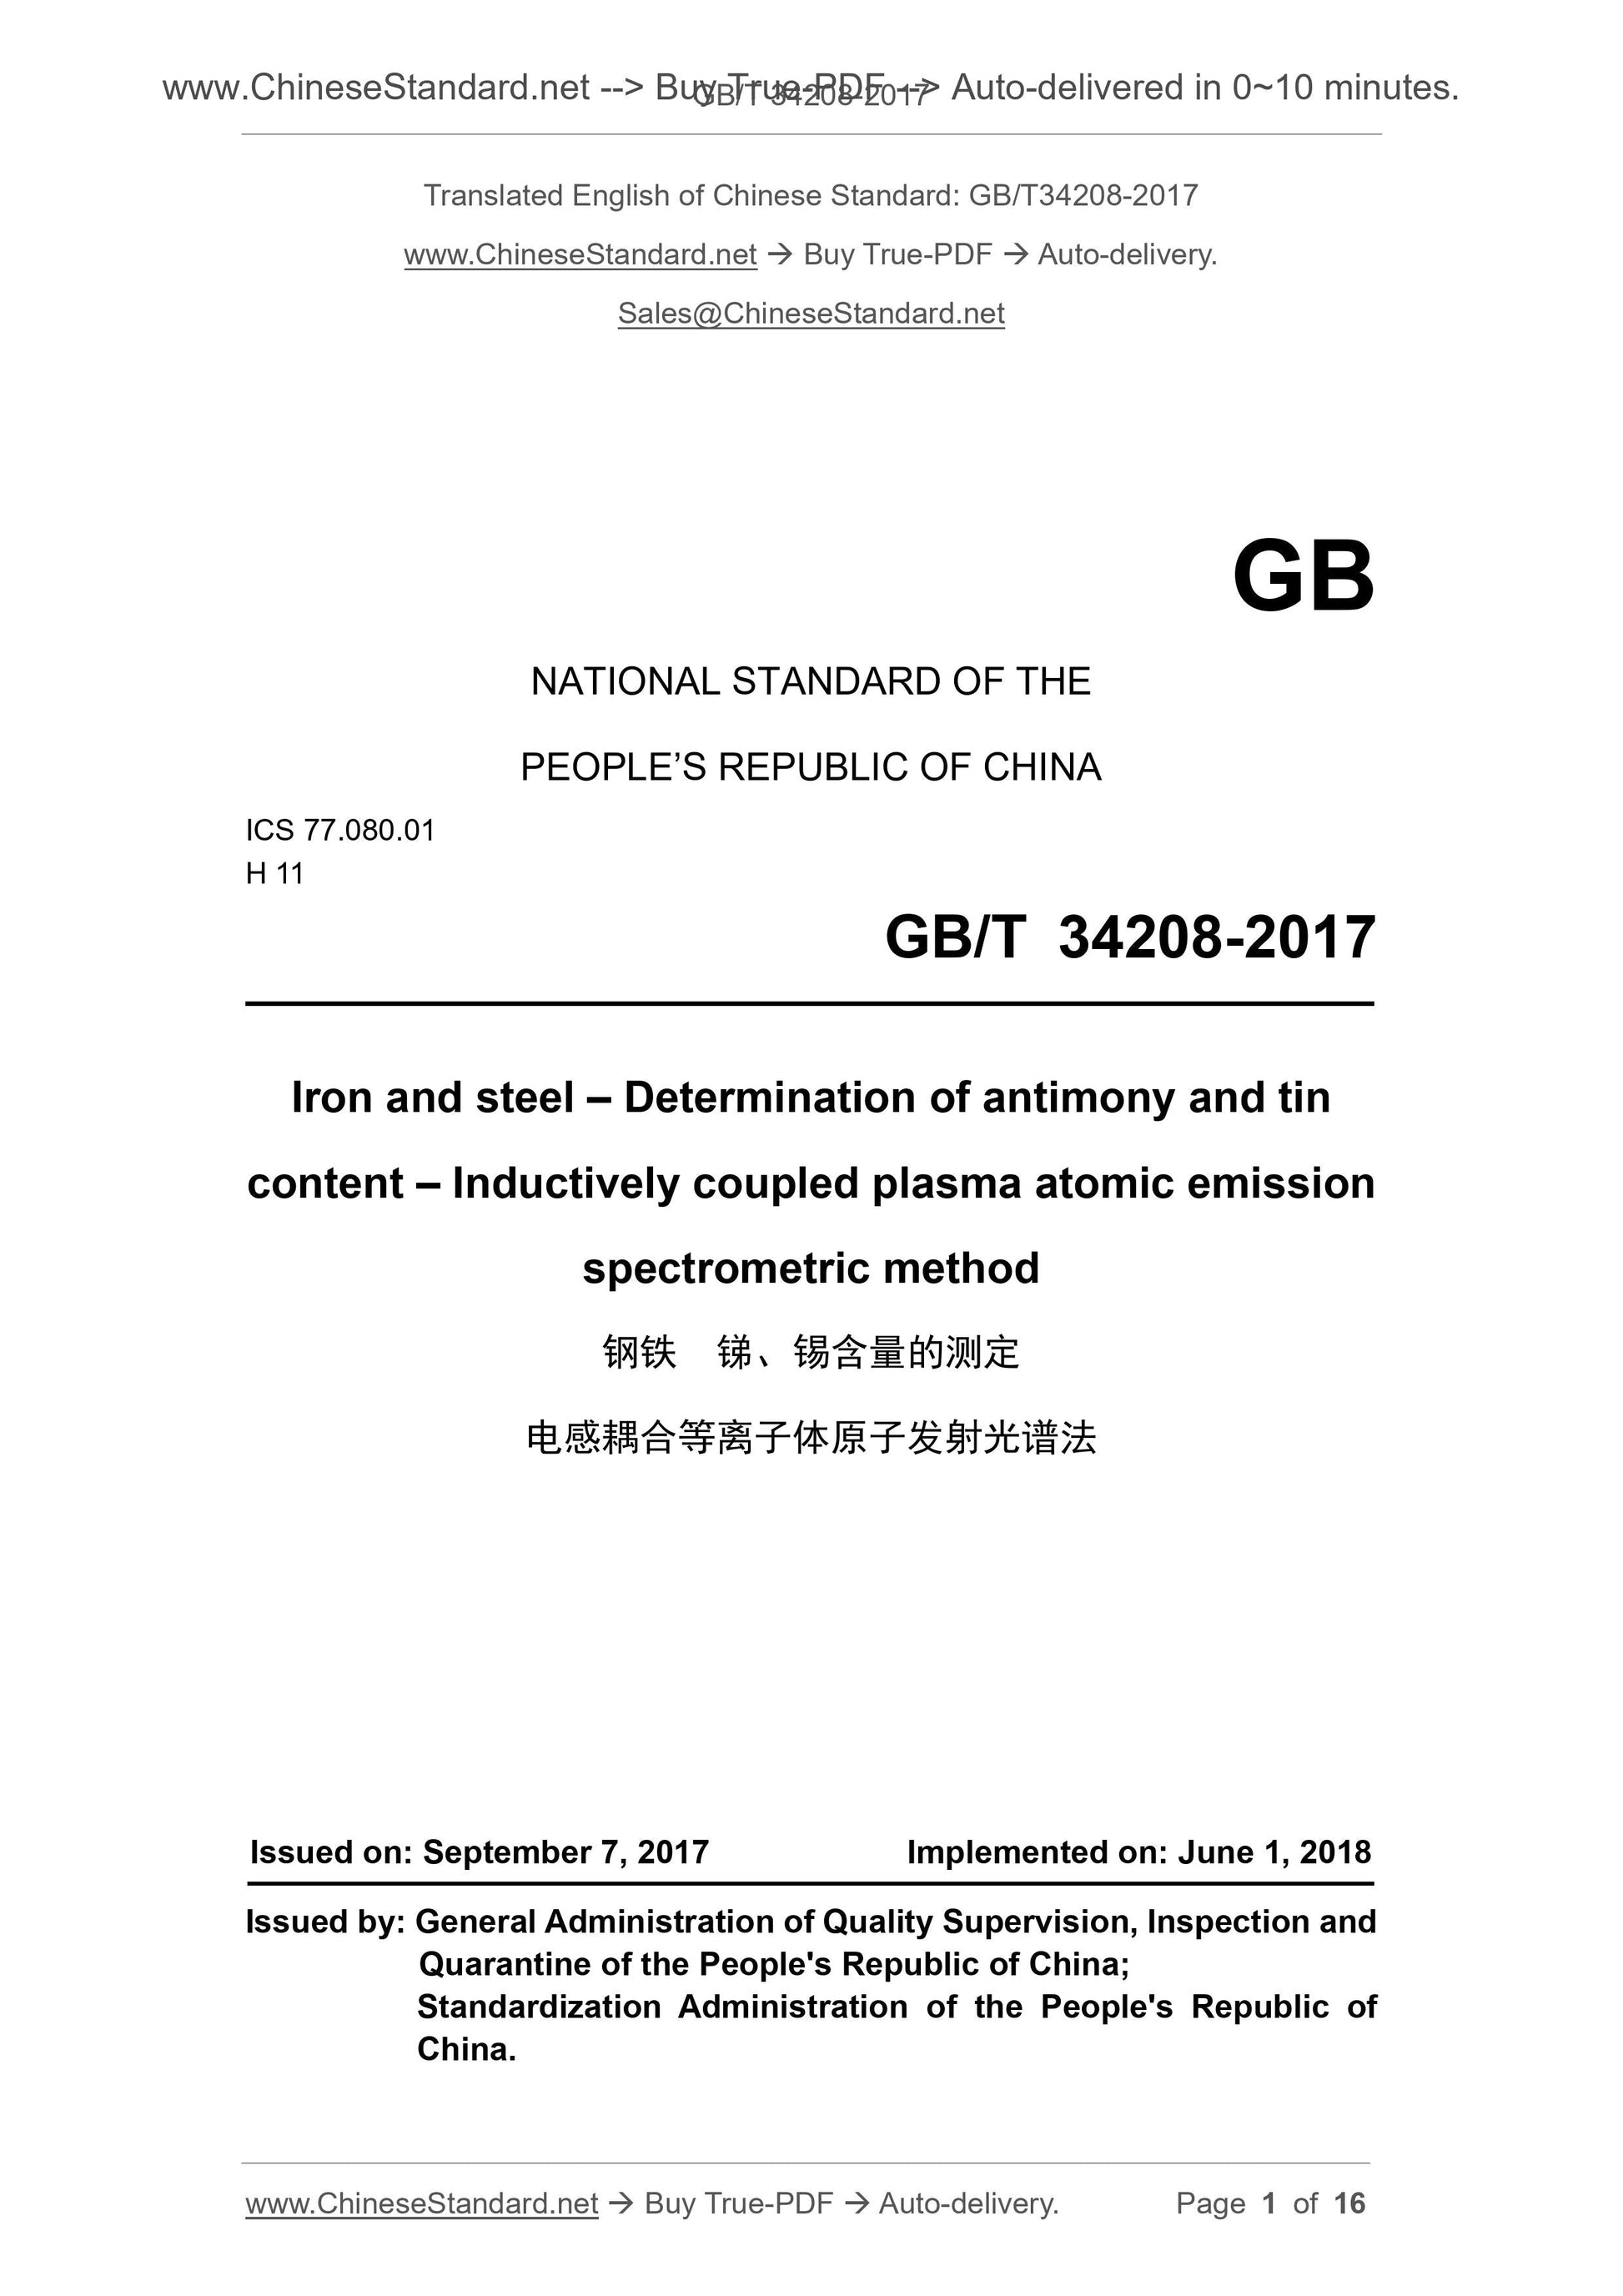 GB/T 34208-2017 Page 1